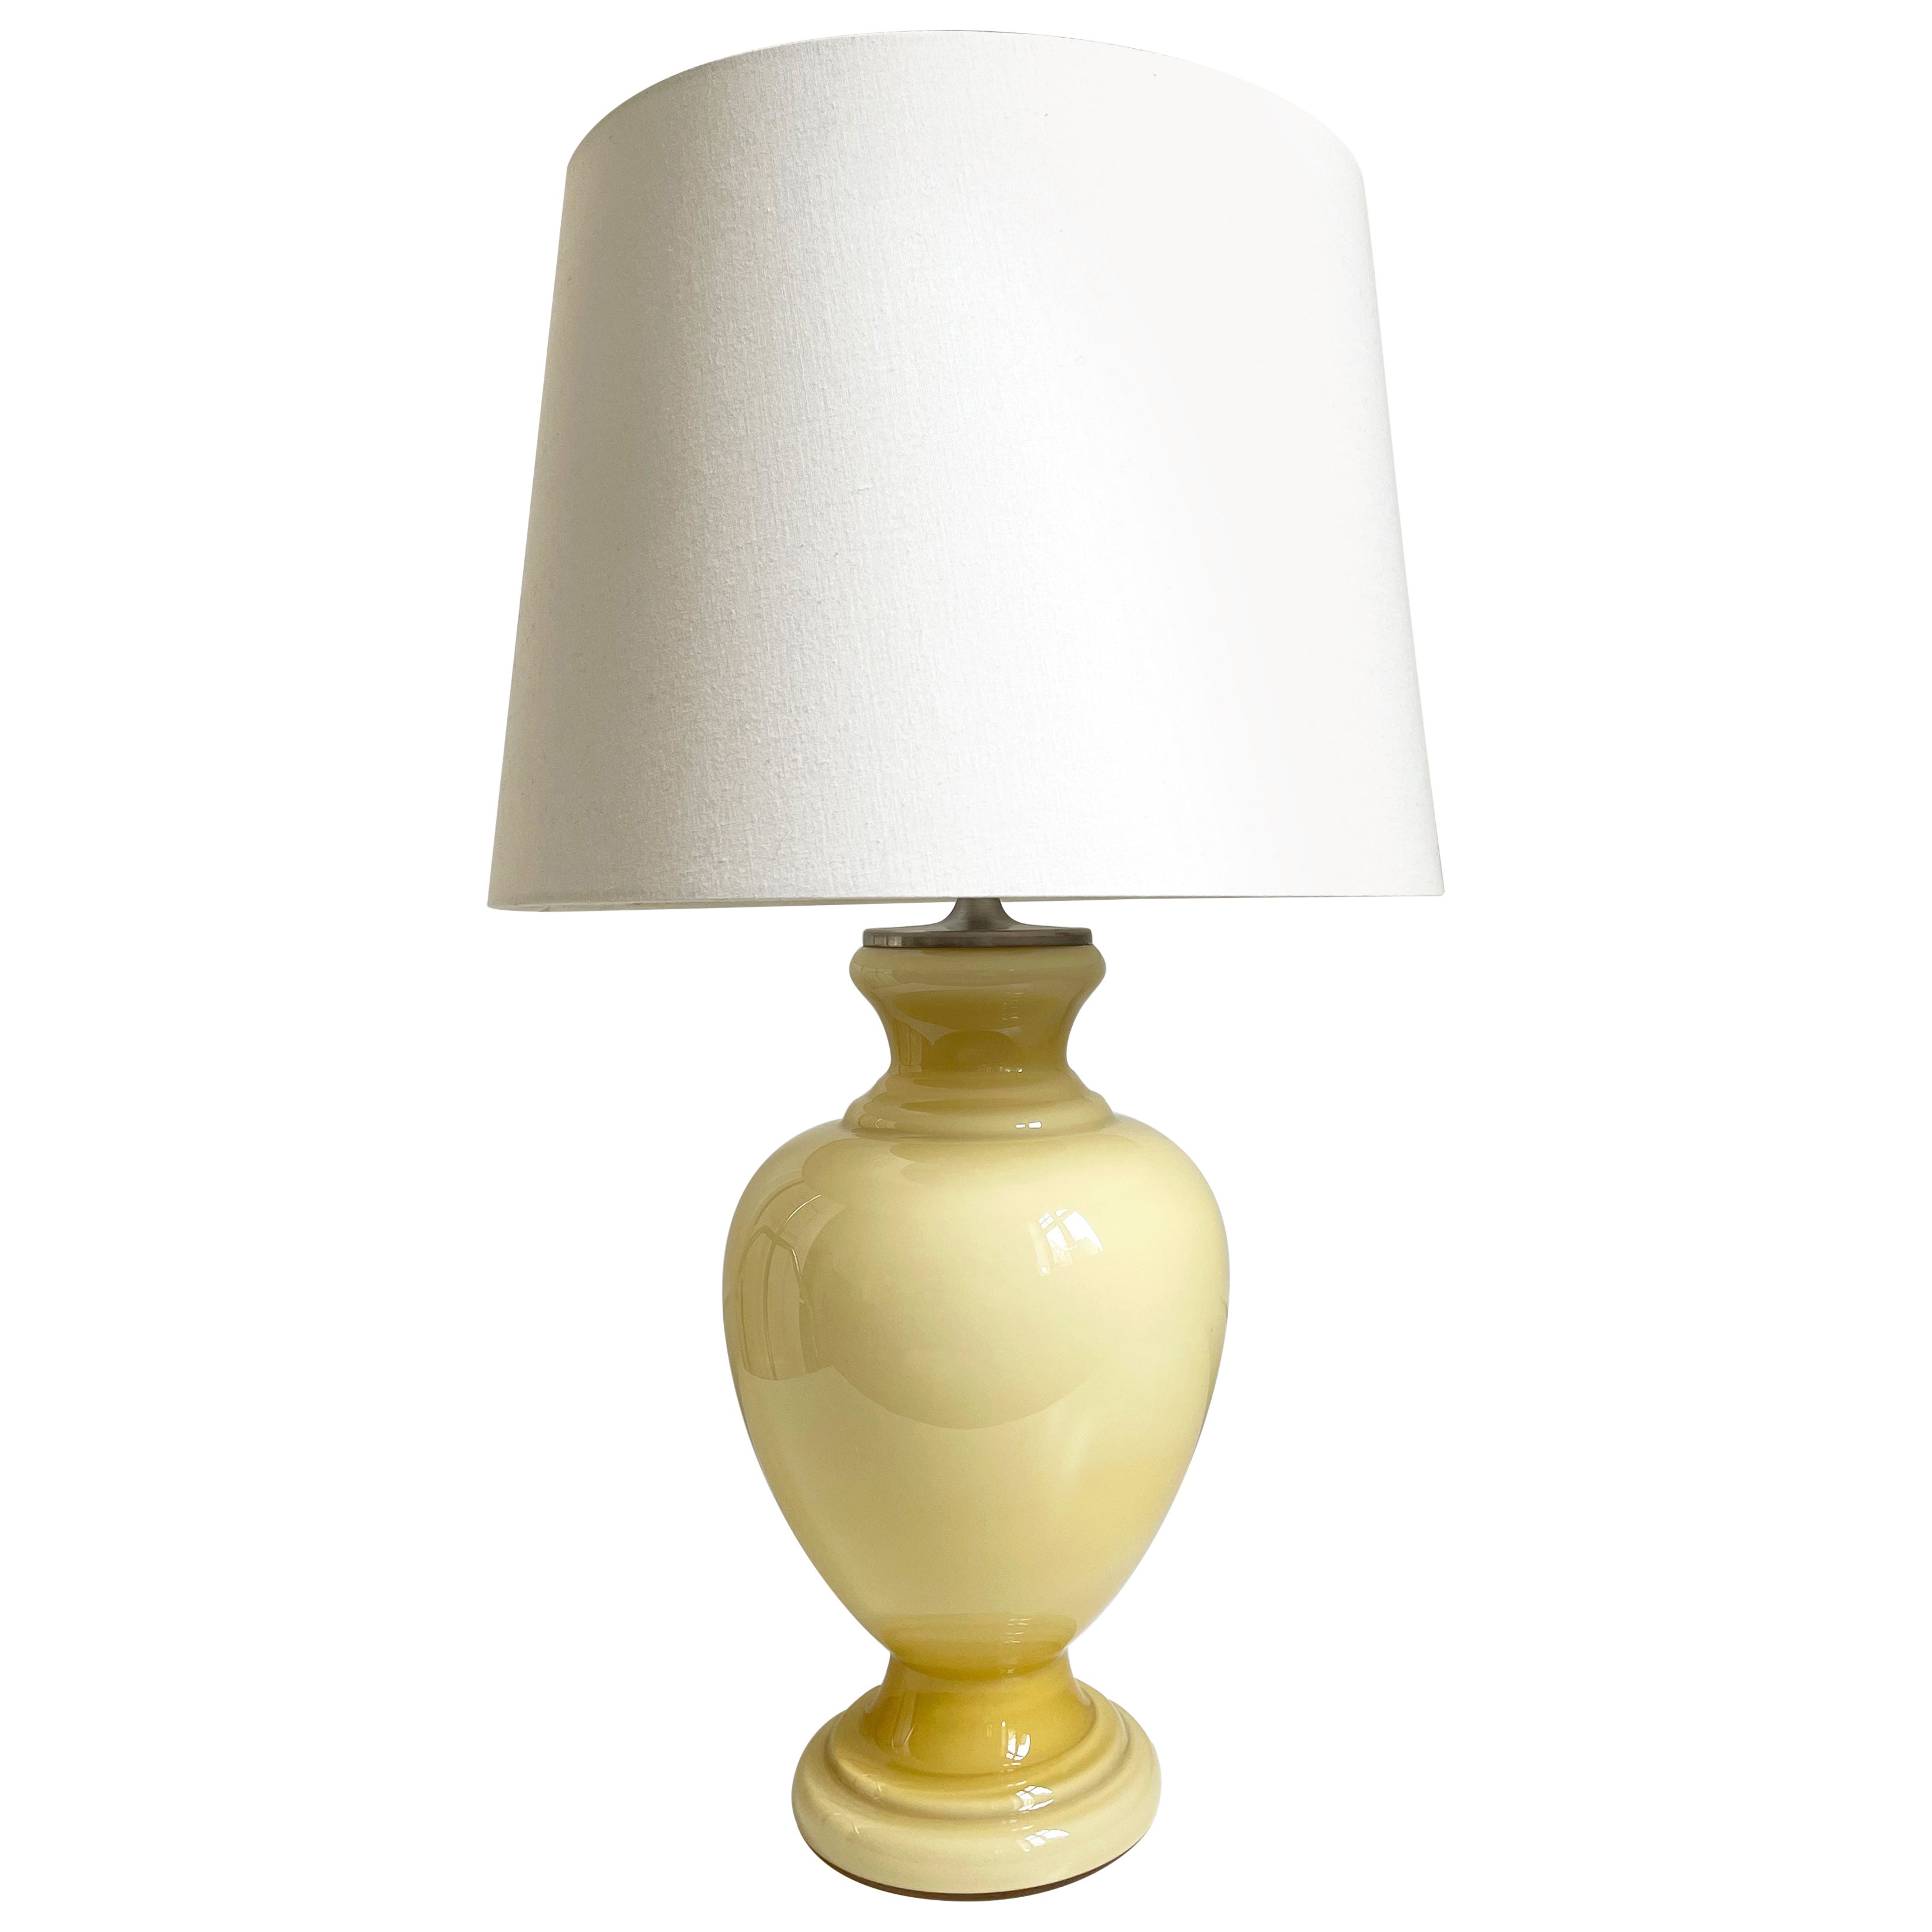 Spring Yellow Royal Copenhagen Glass Siena Table Lamp by Holmegaard, 1990 For Sale